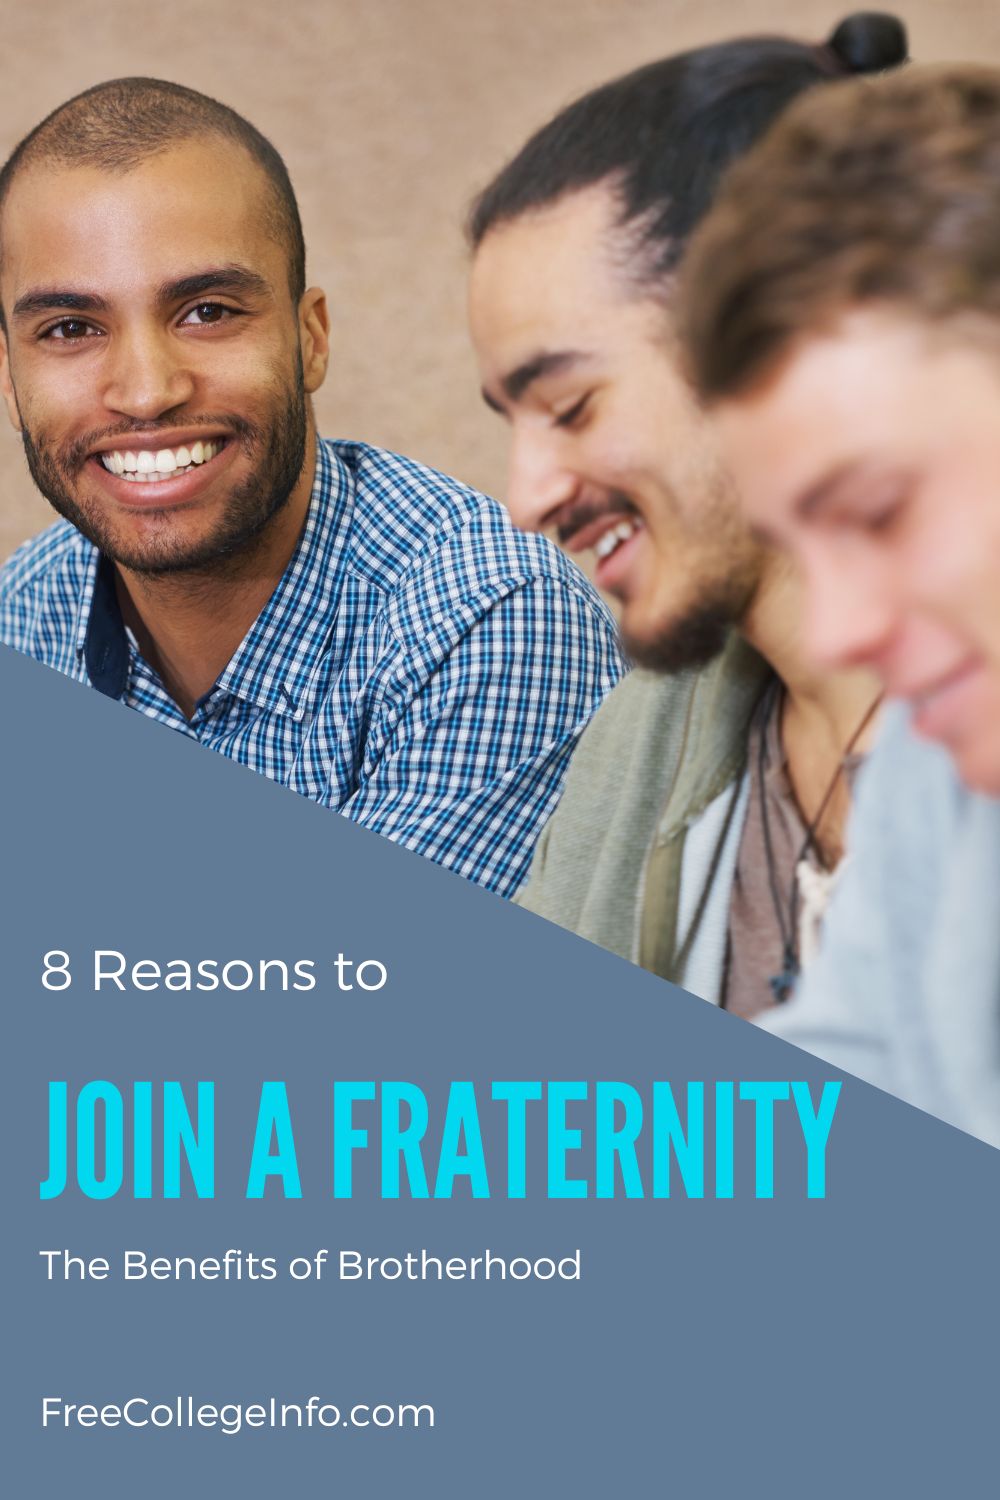 Reasons to Join a Fraternity